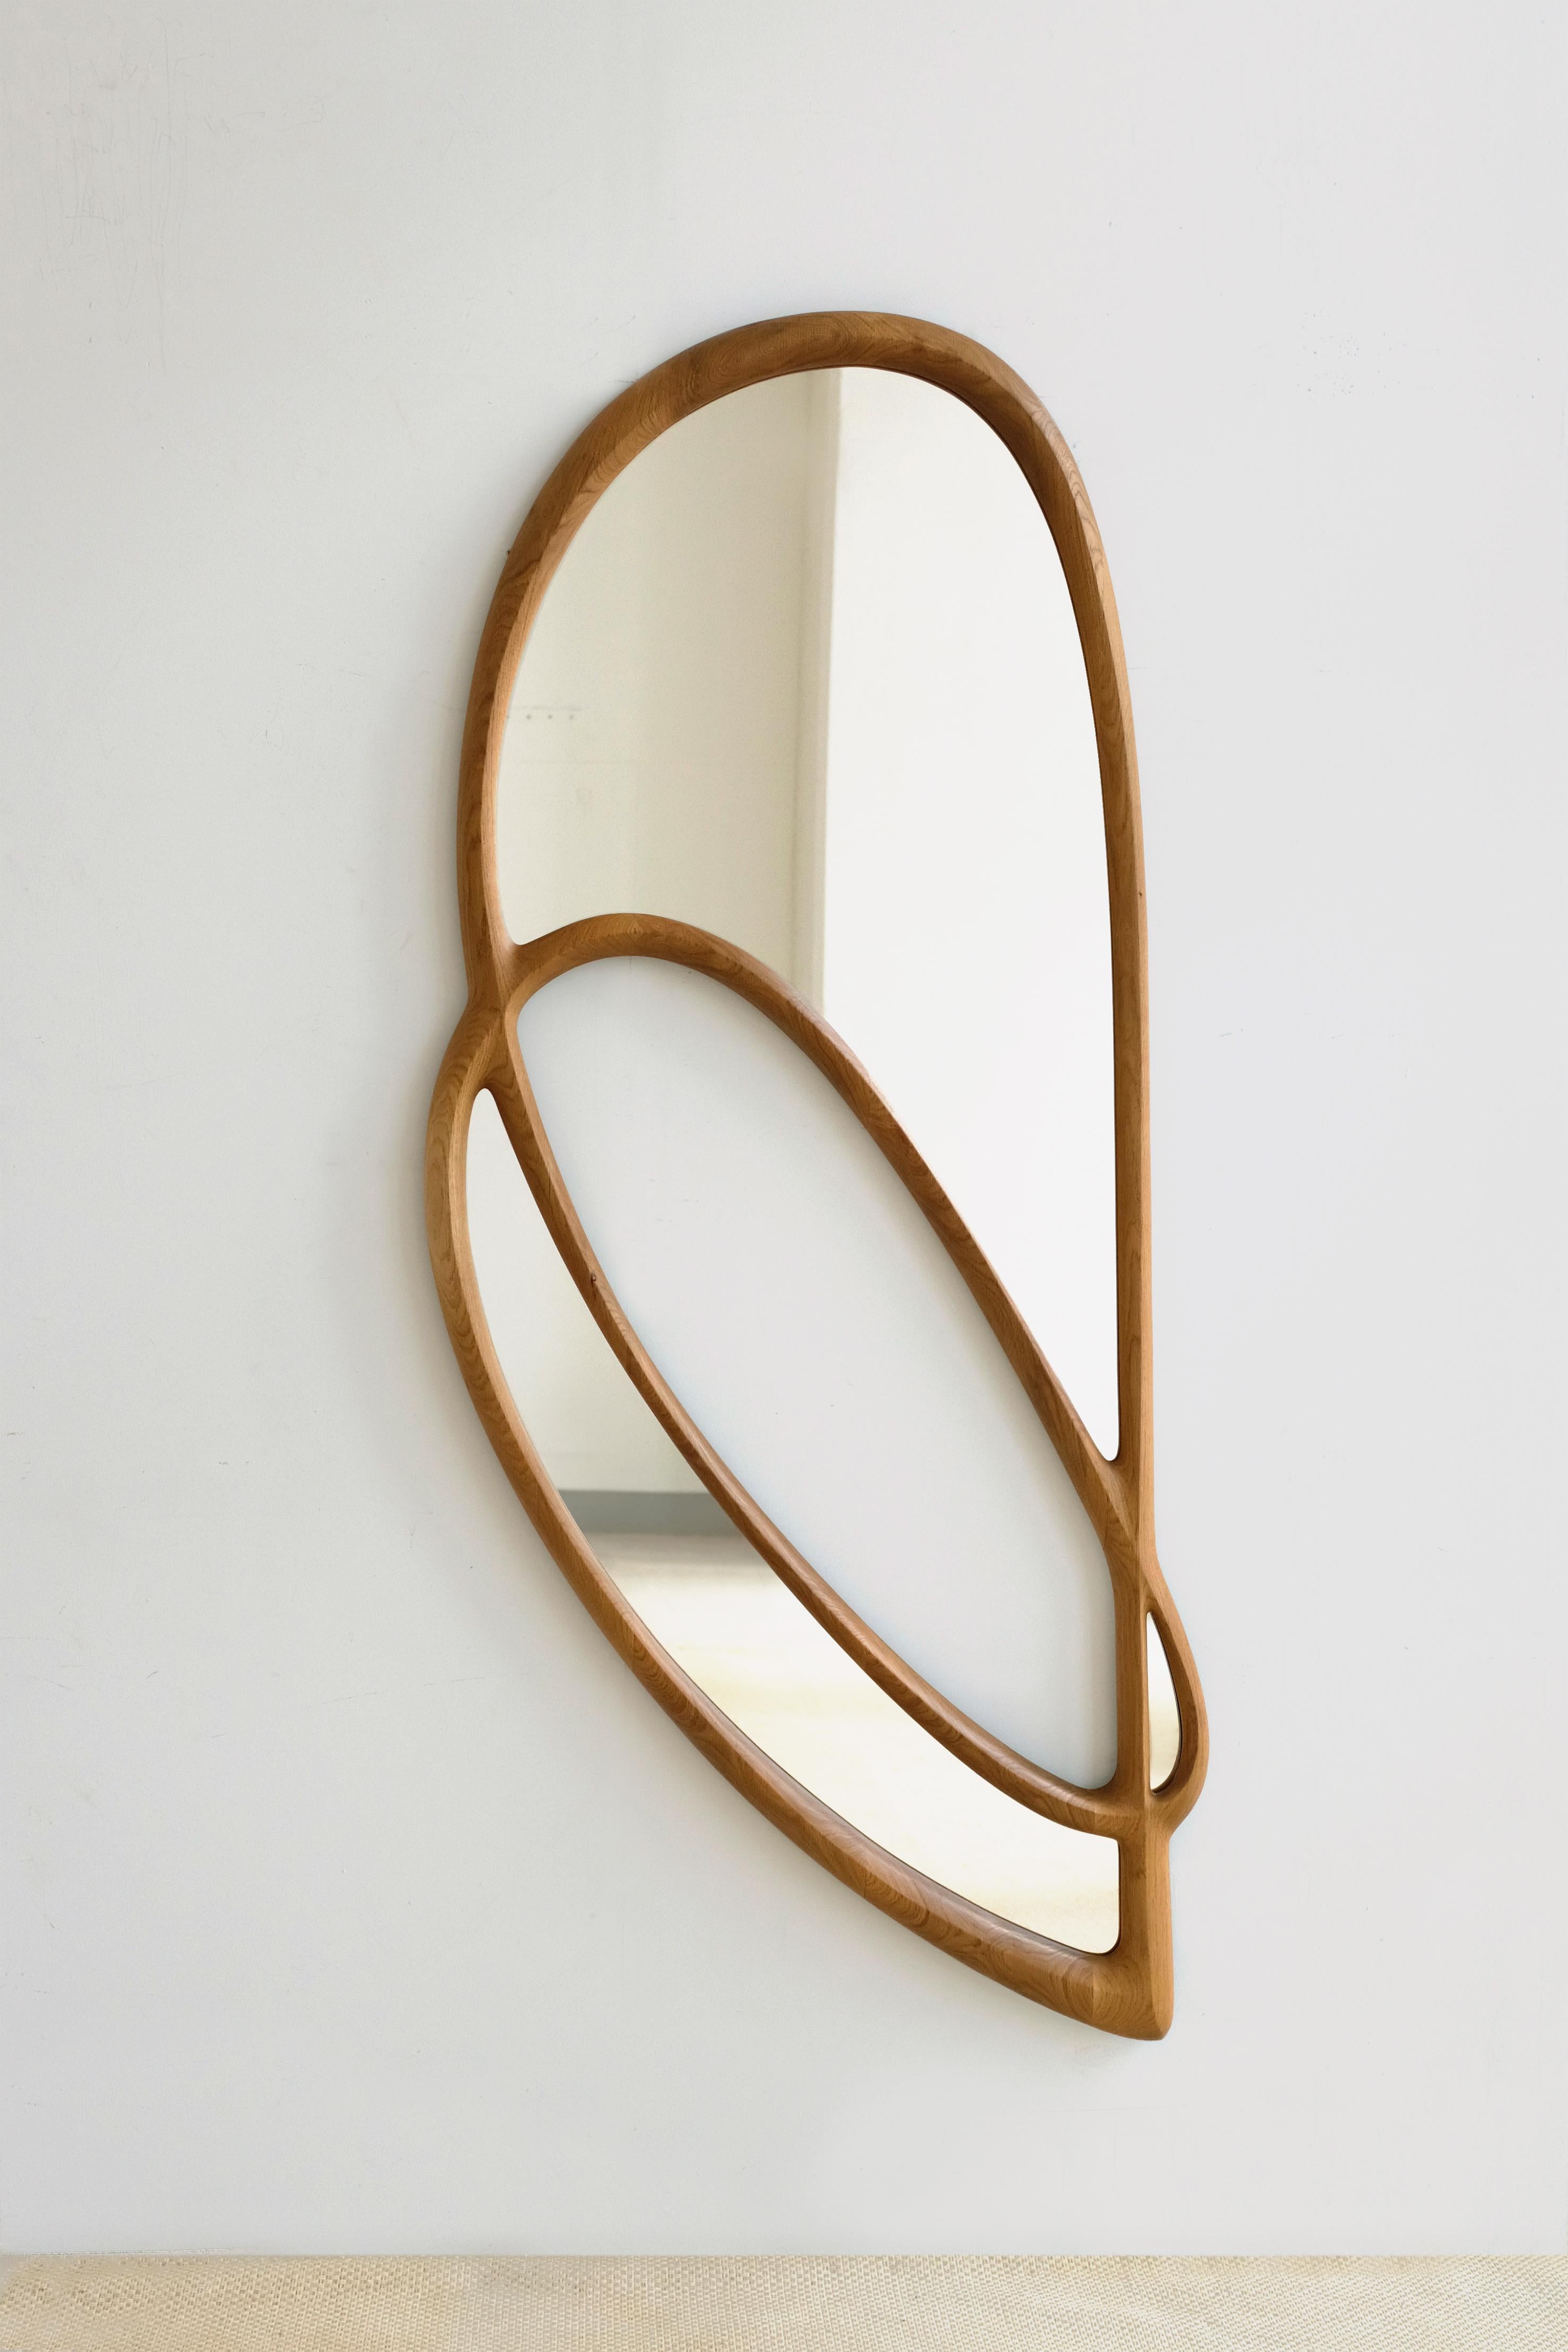 'Dynamic Mirror II' by Soo Joo is a wooden wall mirror with a unique but timeless asymmetric form. It is hung with a custom-made steel French cleats, and can be hung horizontally and vertically.

Dynamic Mirror II is a novel asymmetric full-body